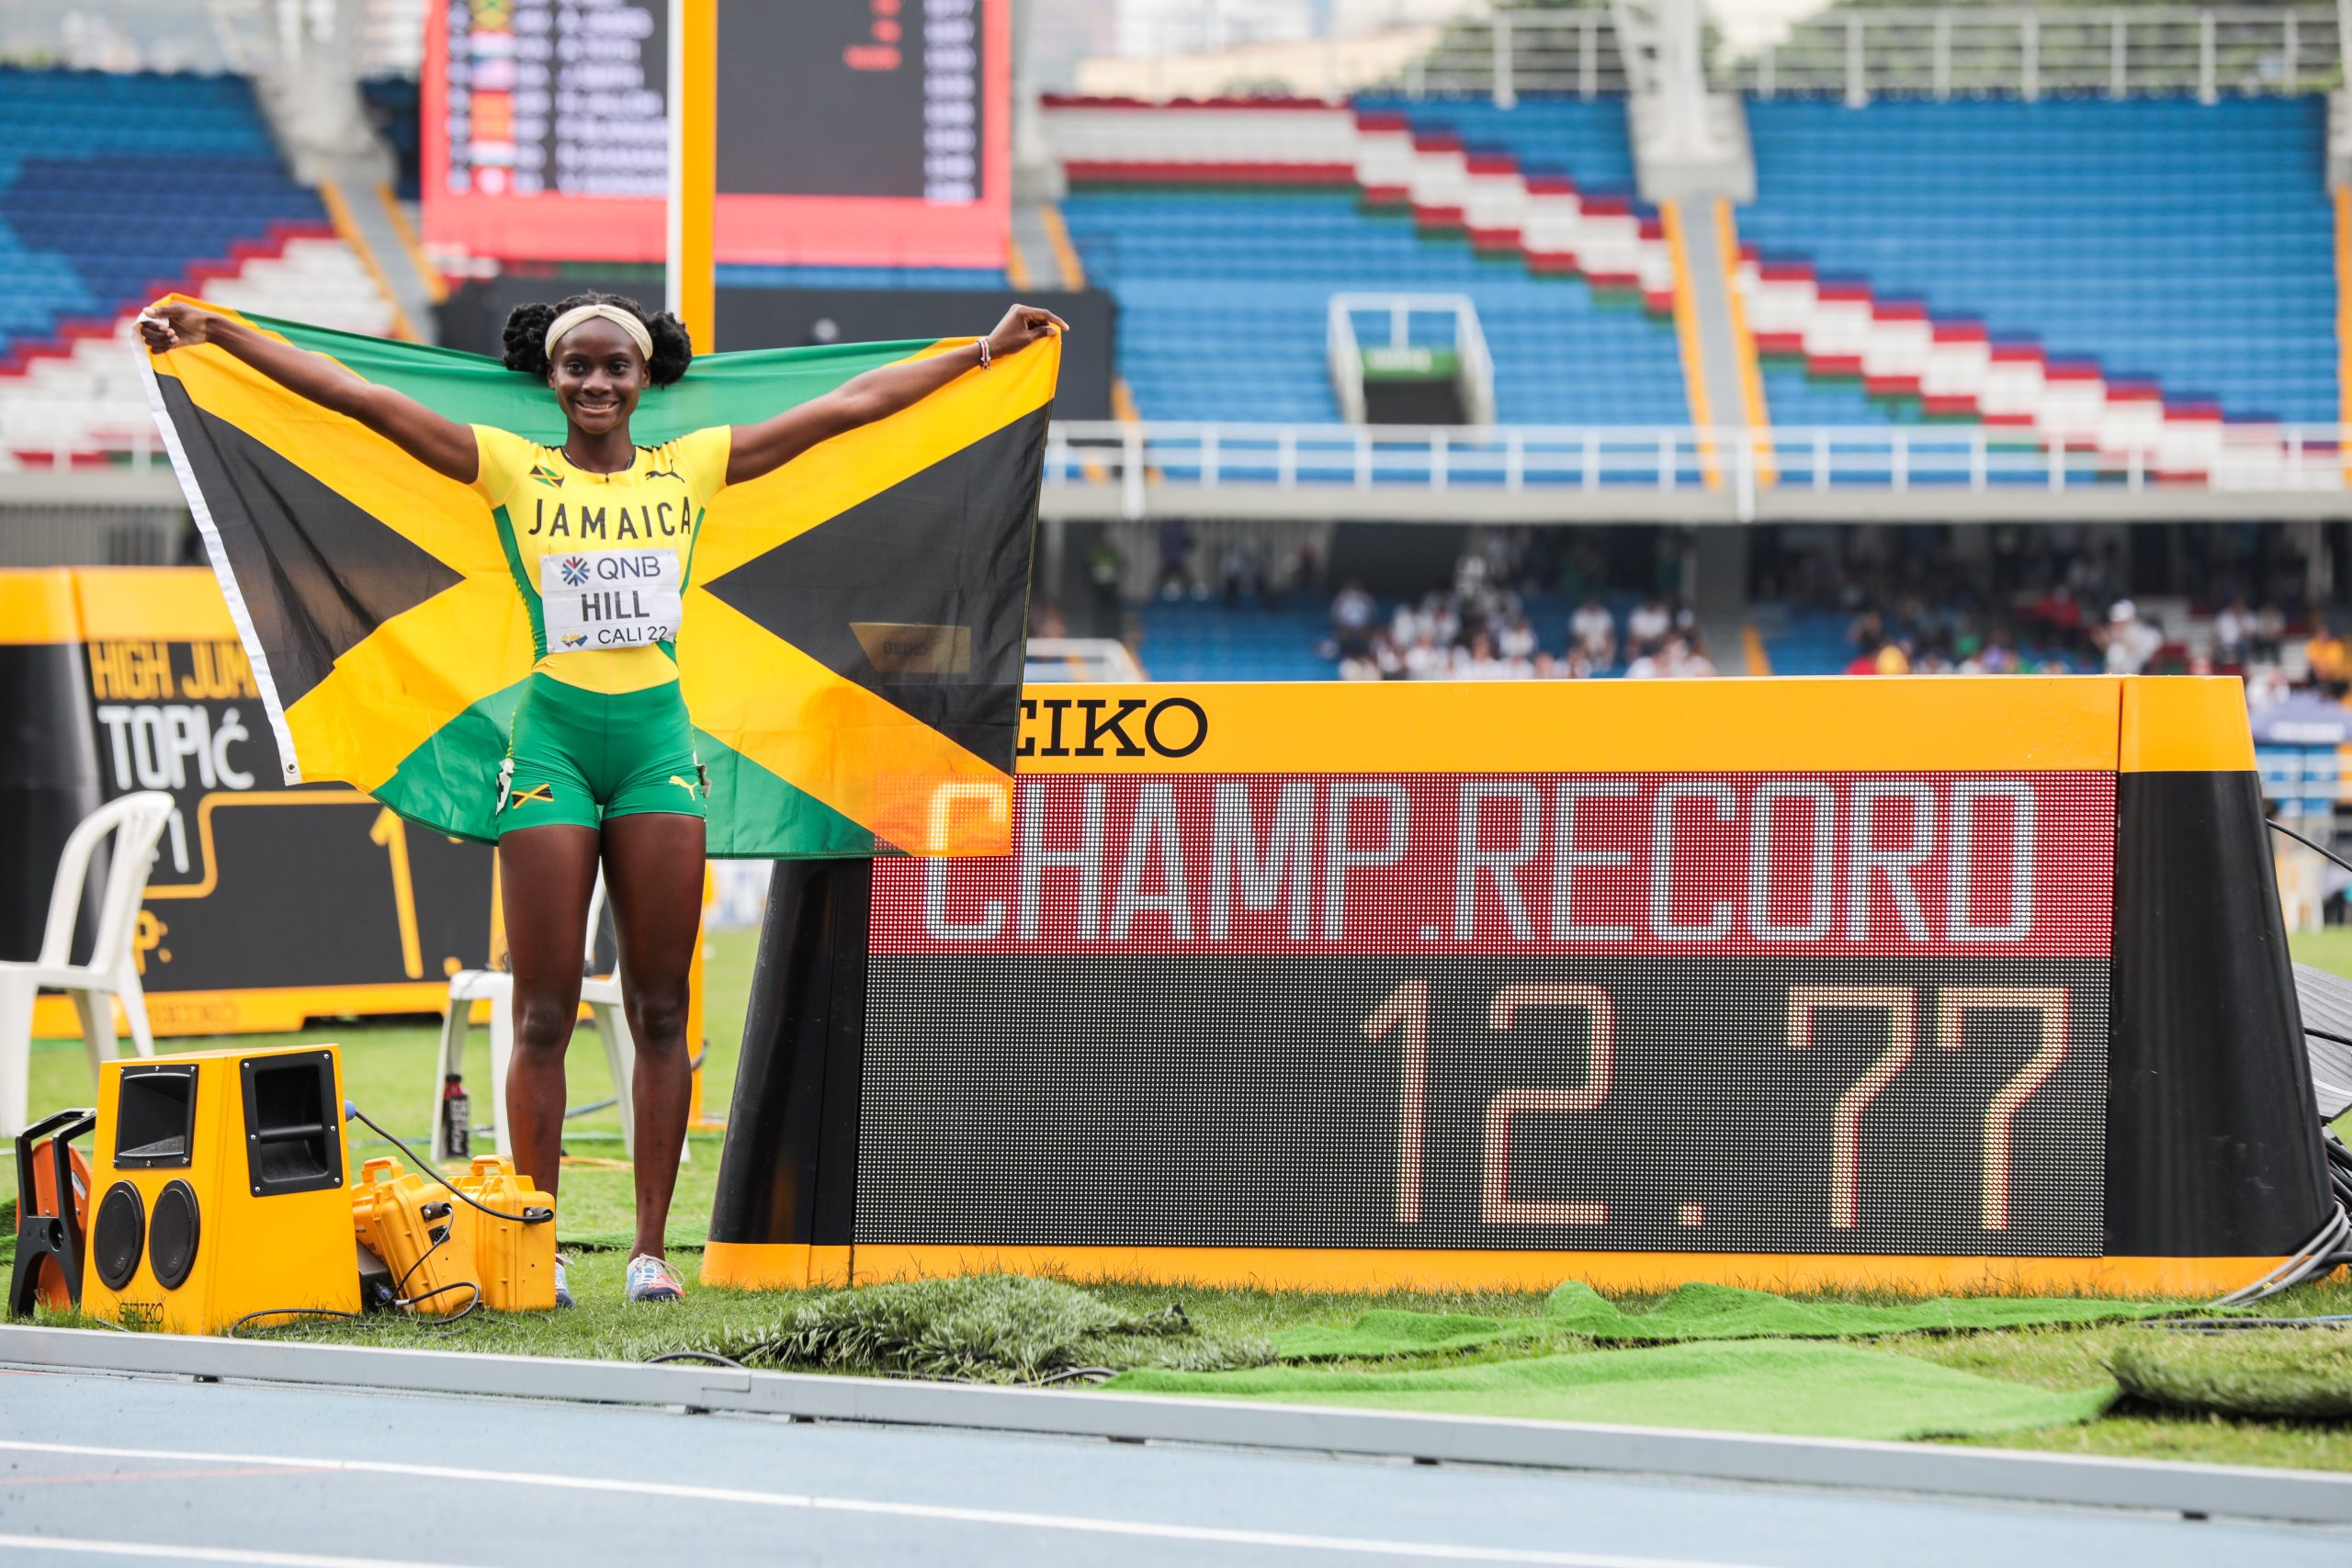 Kerrica Hill poses at the clock to celebrate her 12.77 championship record on Saturday's (6 Aug) final day of the Cali22 World Athletics U20 Championships in Colombia.